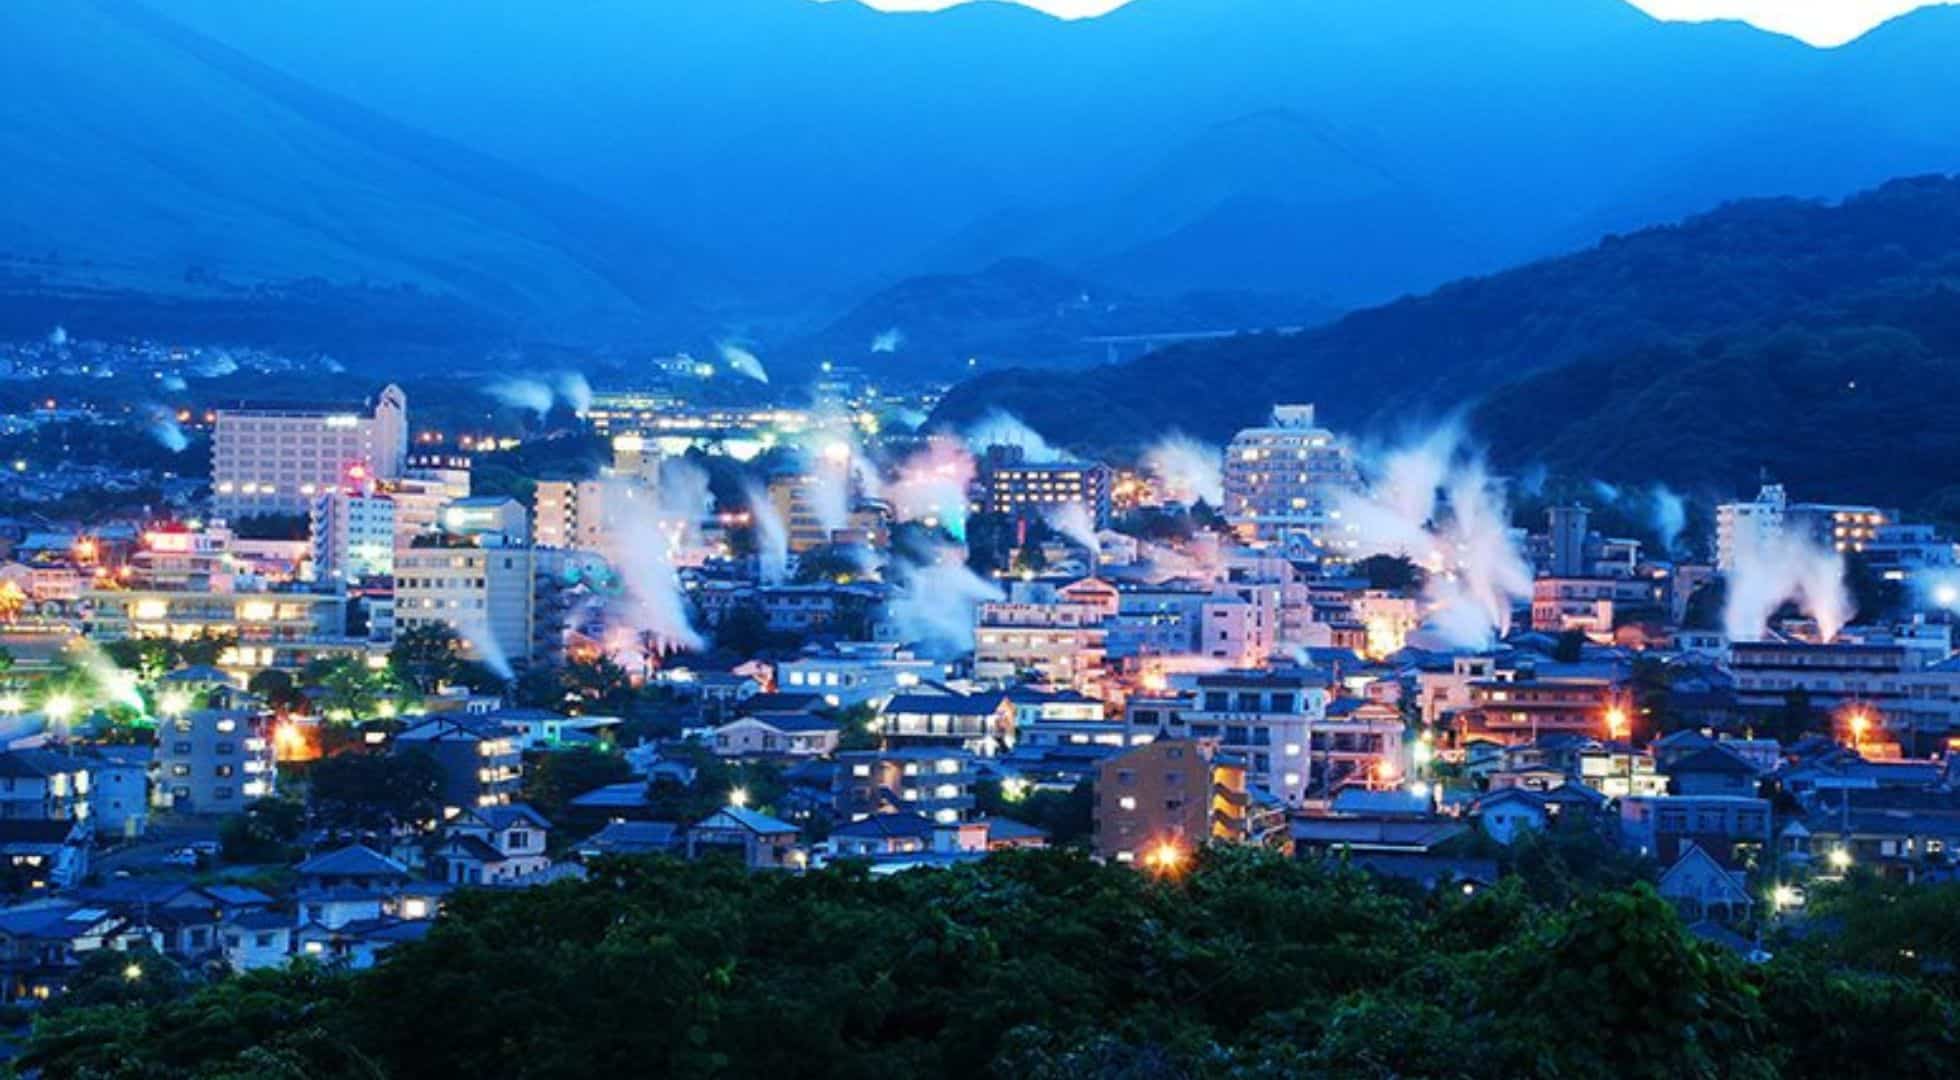 Beppu is a port that you can visit on a Tokyo cruise